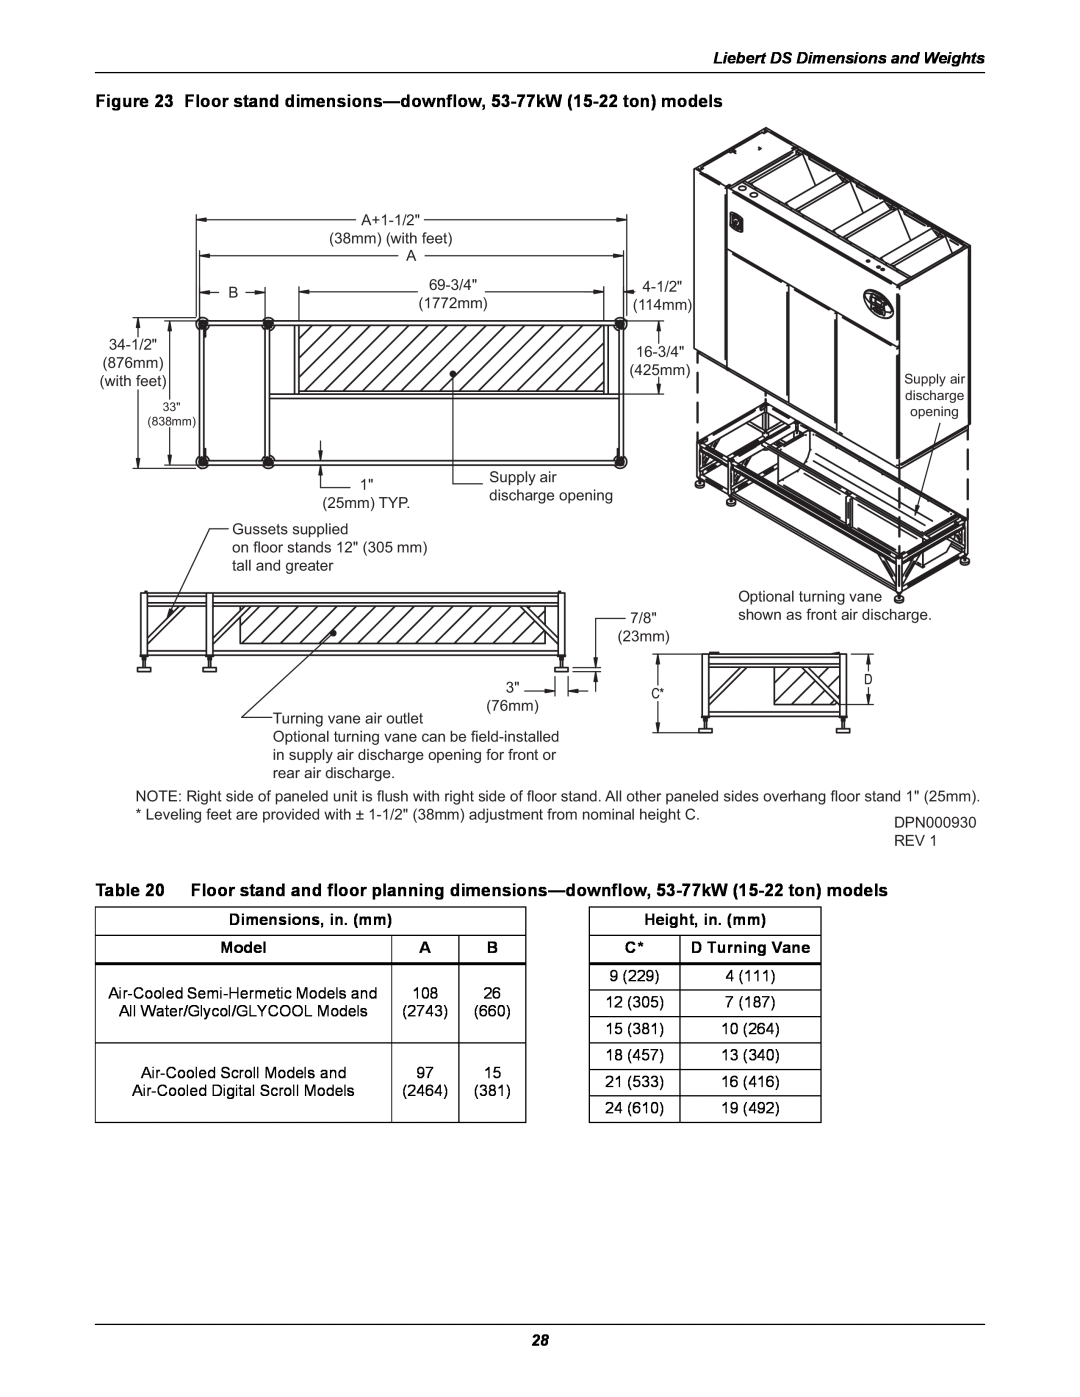 Liebert user manual Liebert DS Dimensions and Weights, Dimensions, in. mm, Model, Height, in. mm, D Turning Vane 